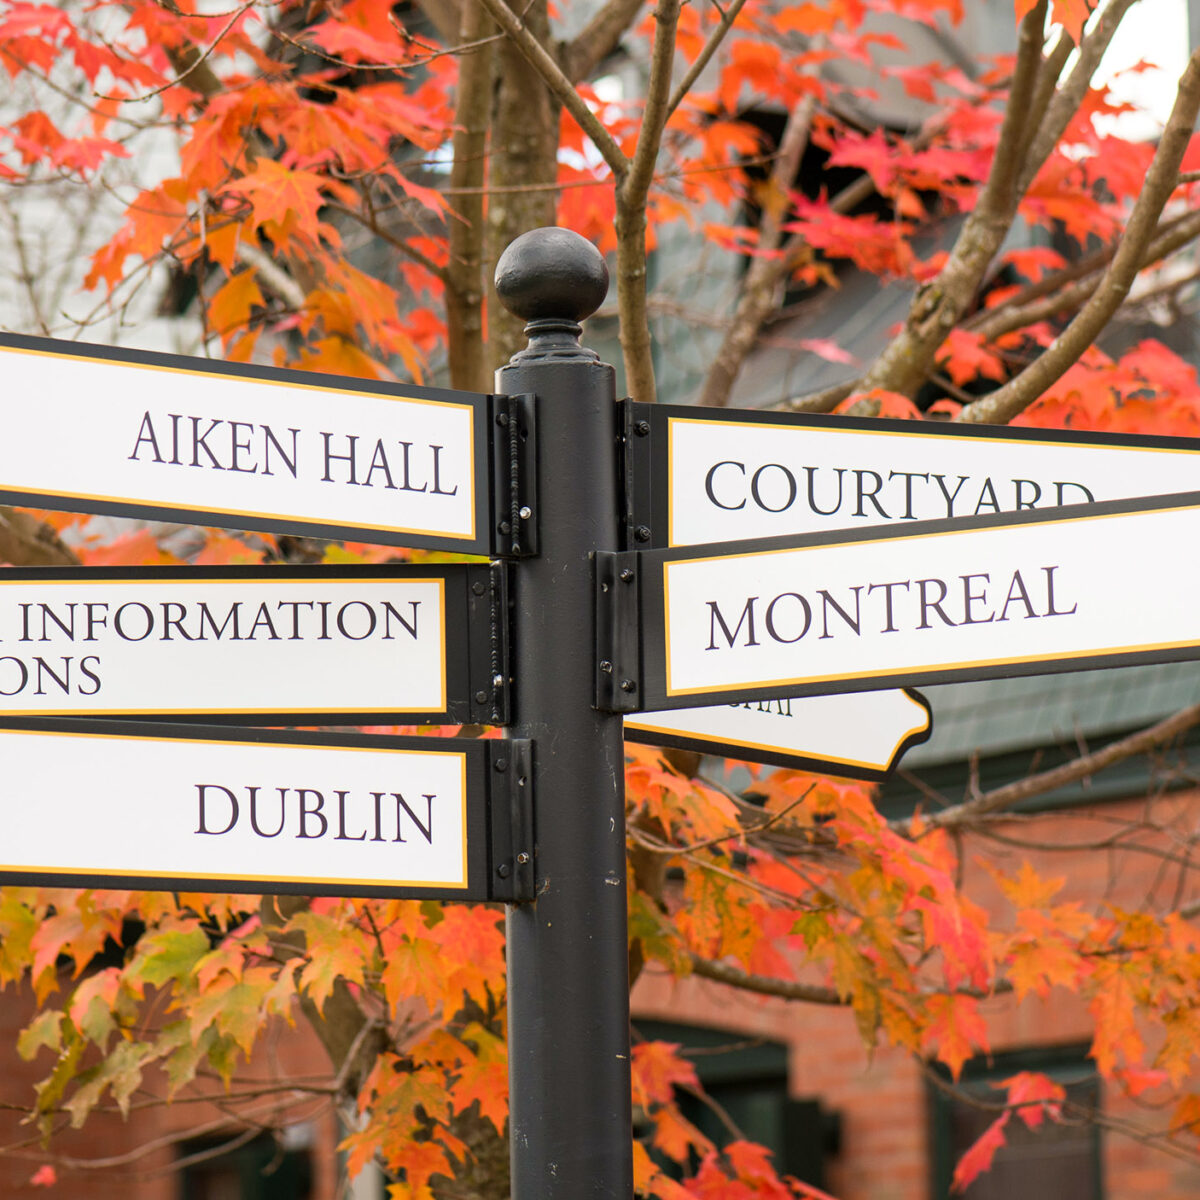 directional signs pointing in various directions including Montreal, Dublin, Miller Information Commons, Courtyard and Aiken Hall agains a backdrop of red-colored fall leaves